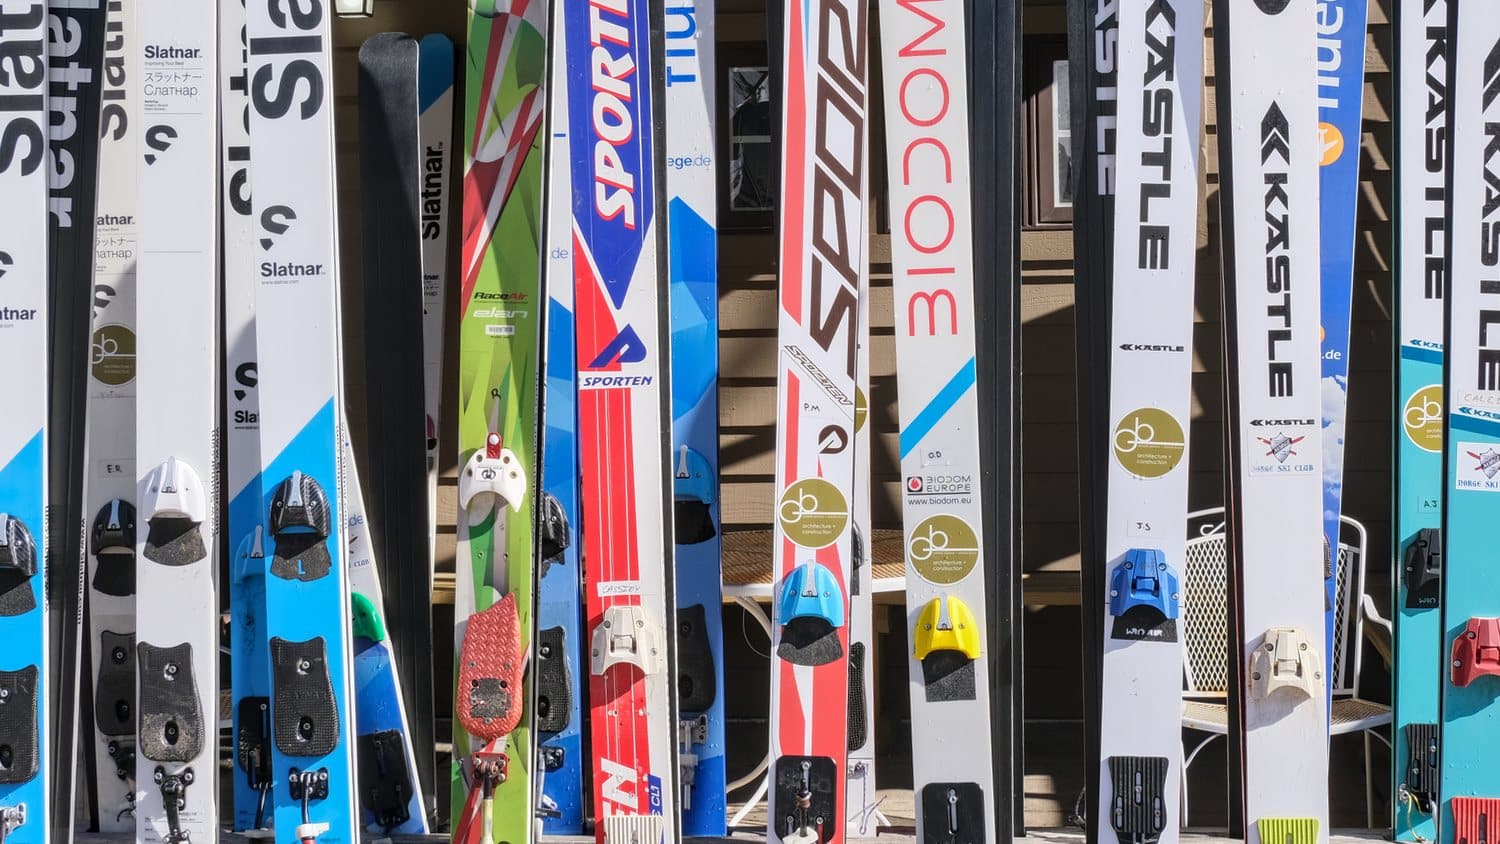 Skis lined up outside the clubhouse at the 118th annual Norge Ski Club, winter tournament, 2023.